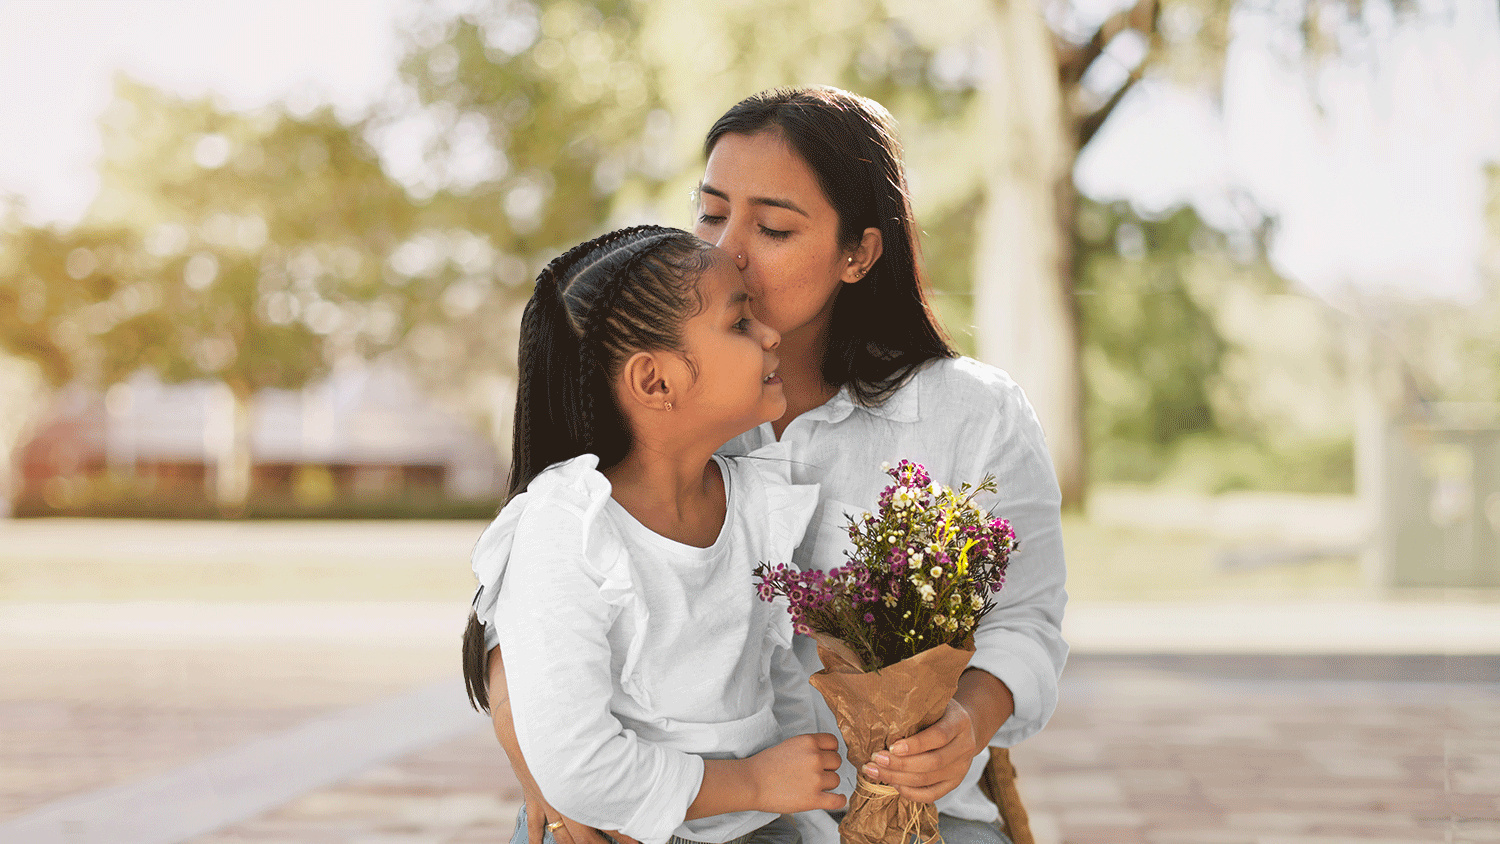 Mother's Day Tips: The perfect gift for mom